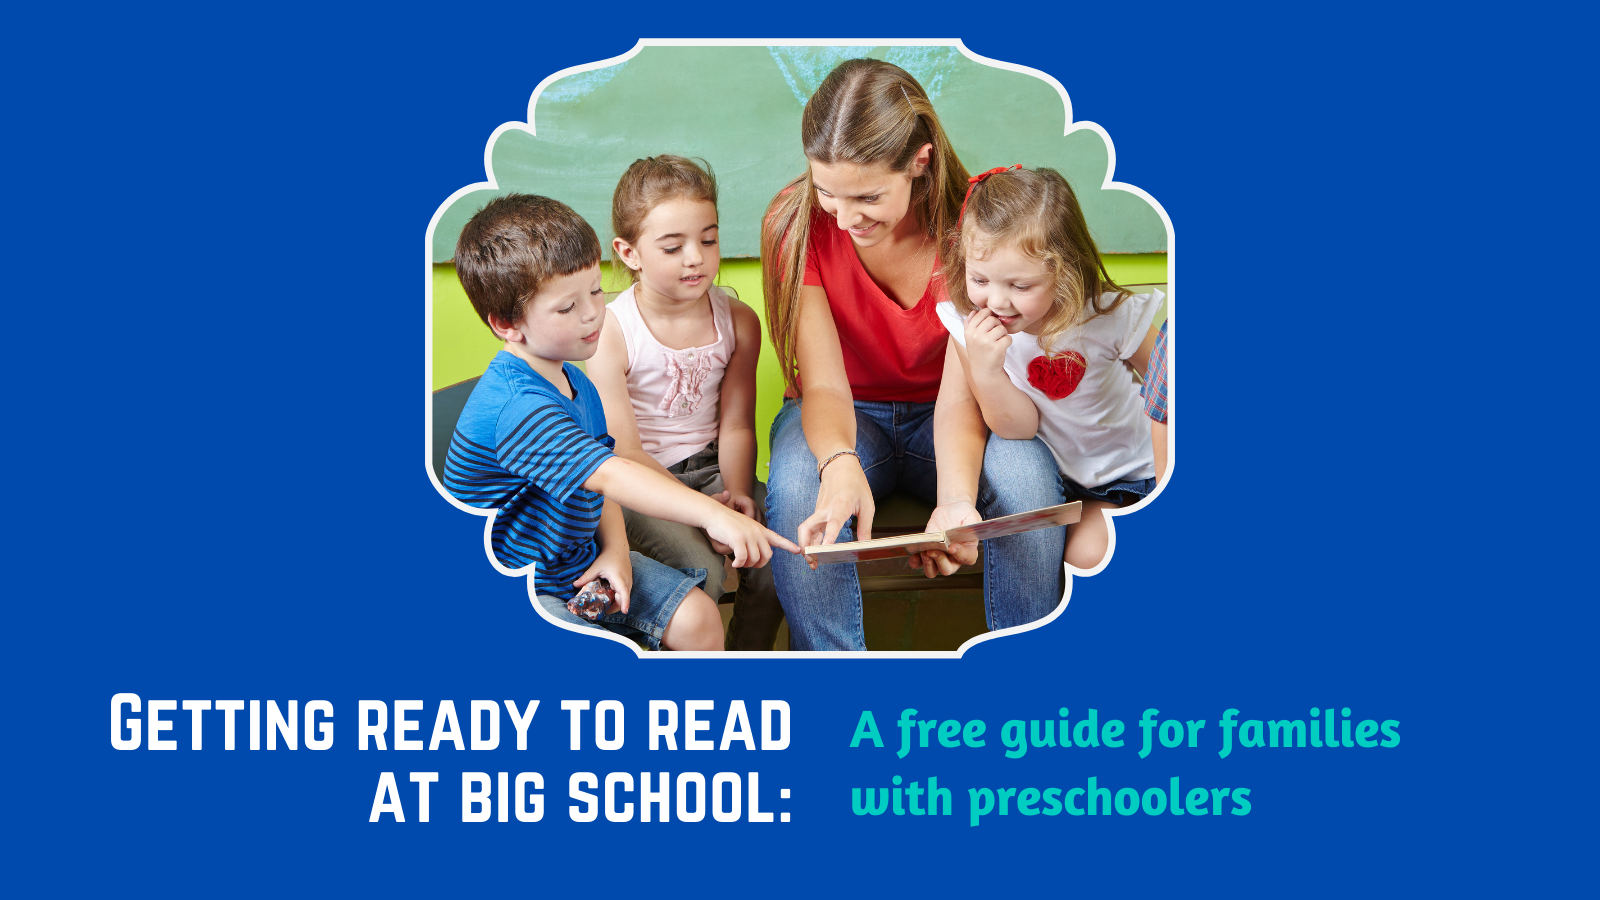 getting-ready-to-read-at-big-school-a-free-guide-for-families-with